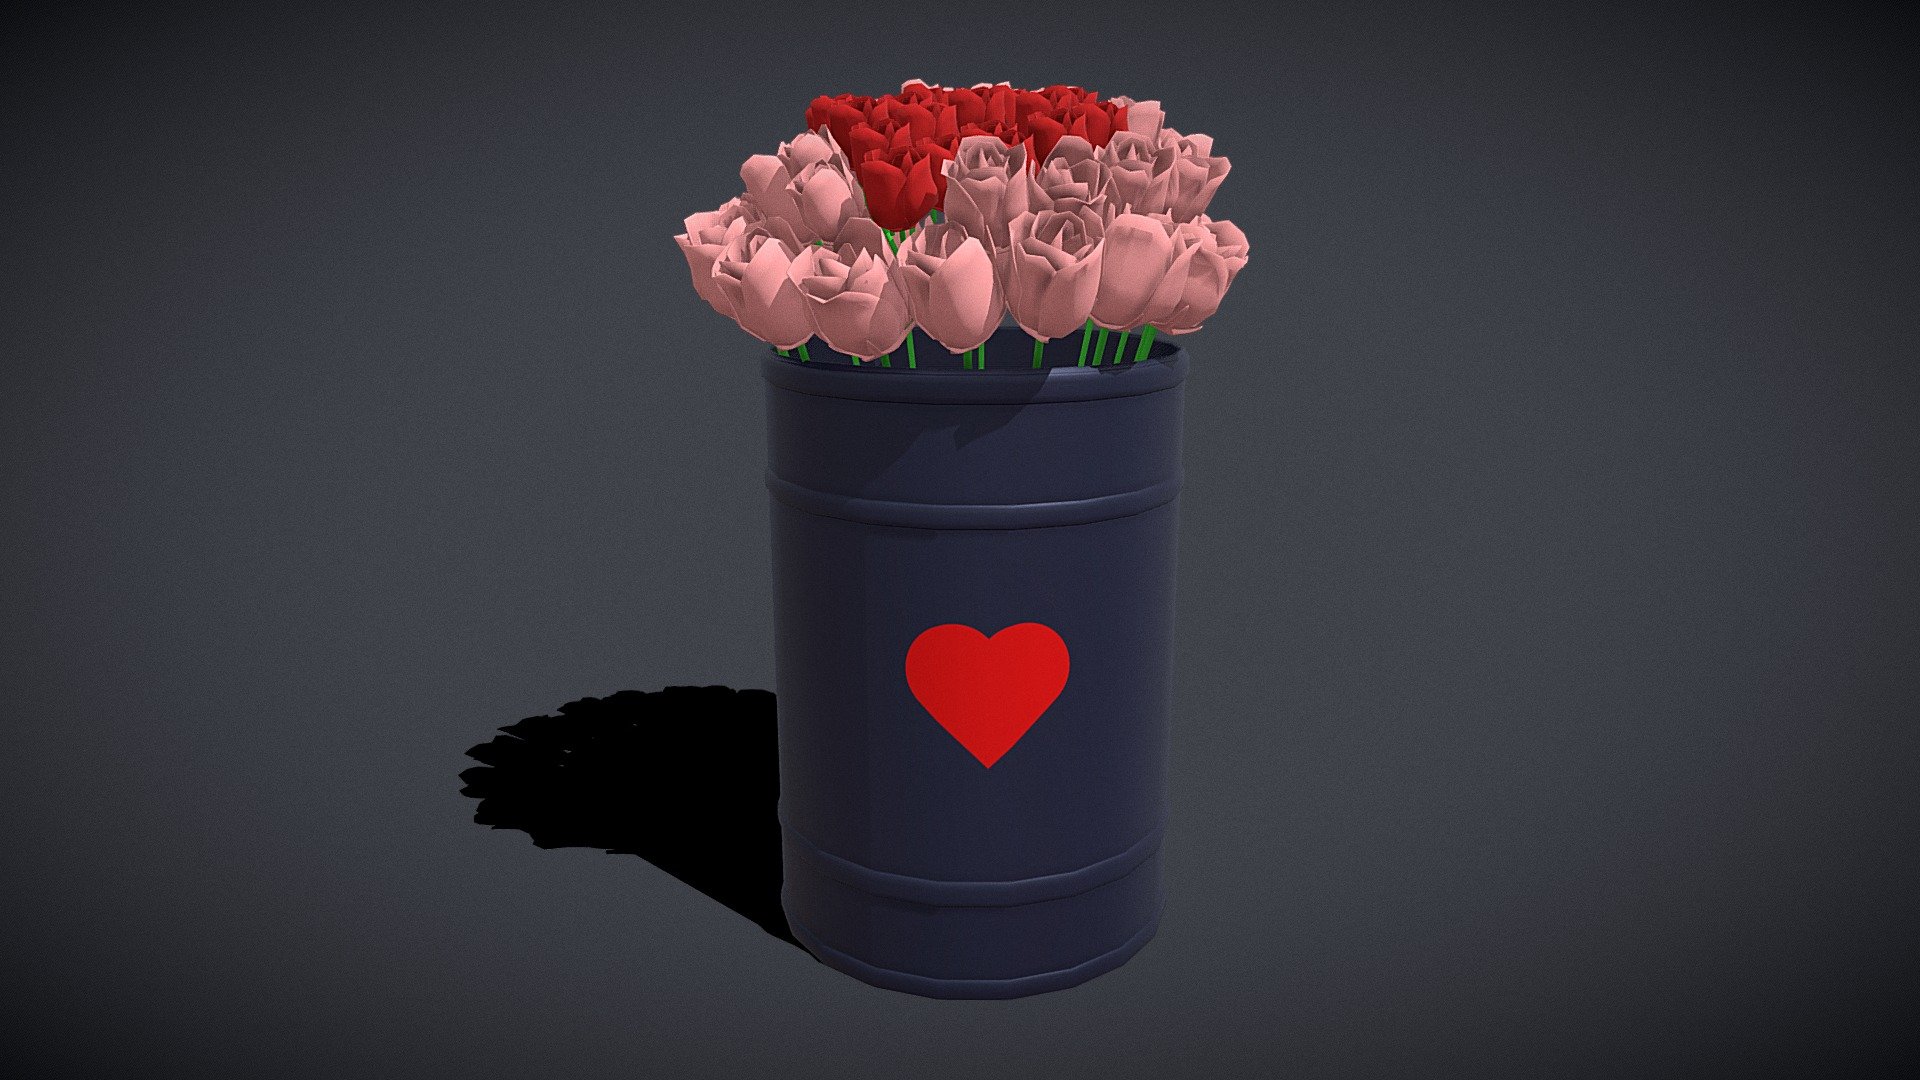 Roses Tin Red and Pink 
VR / AR / Low-poly
PBR approved
Geometry Polygon mesh
Polygons 117,419
Vertices 76,766
Textures 4K
Materials 1 - Roses Tin Red and Pink - Buy Royalty Free 3D model by GetDeadEntertainment 3d model